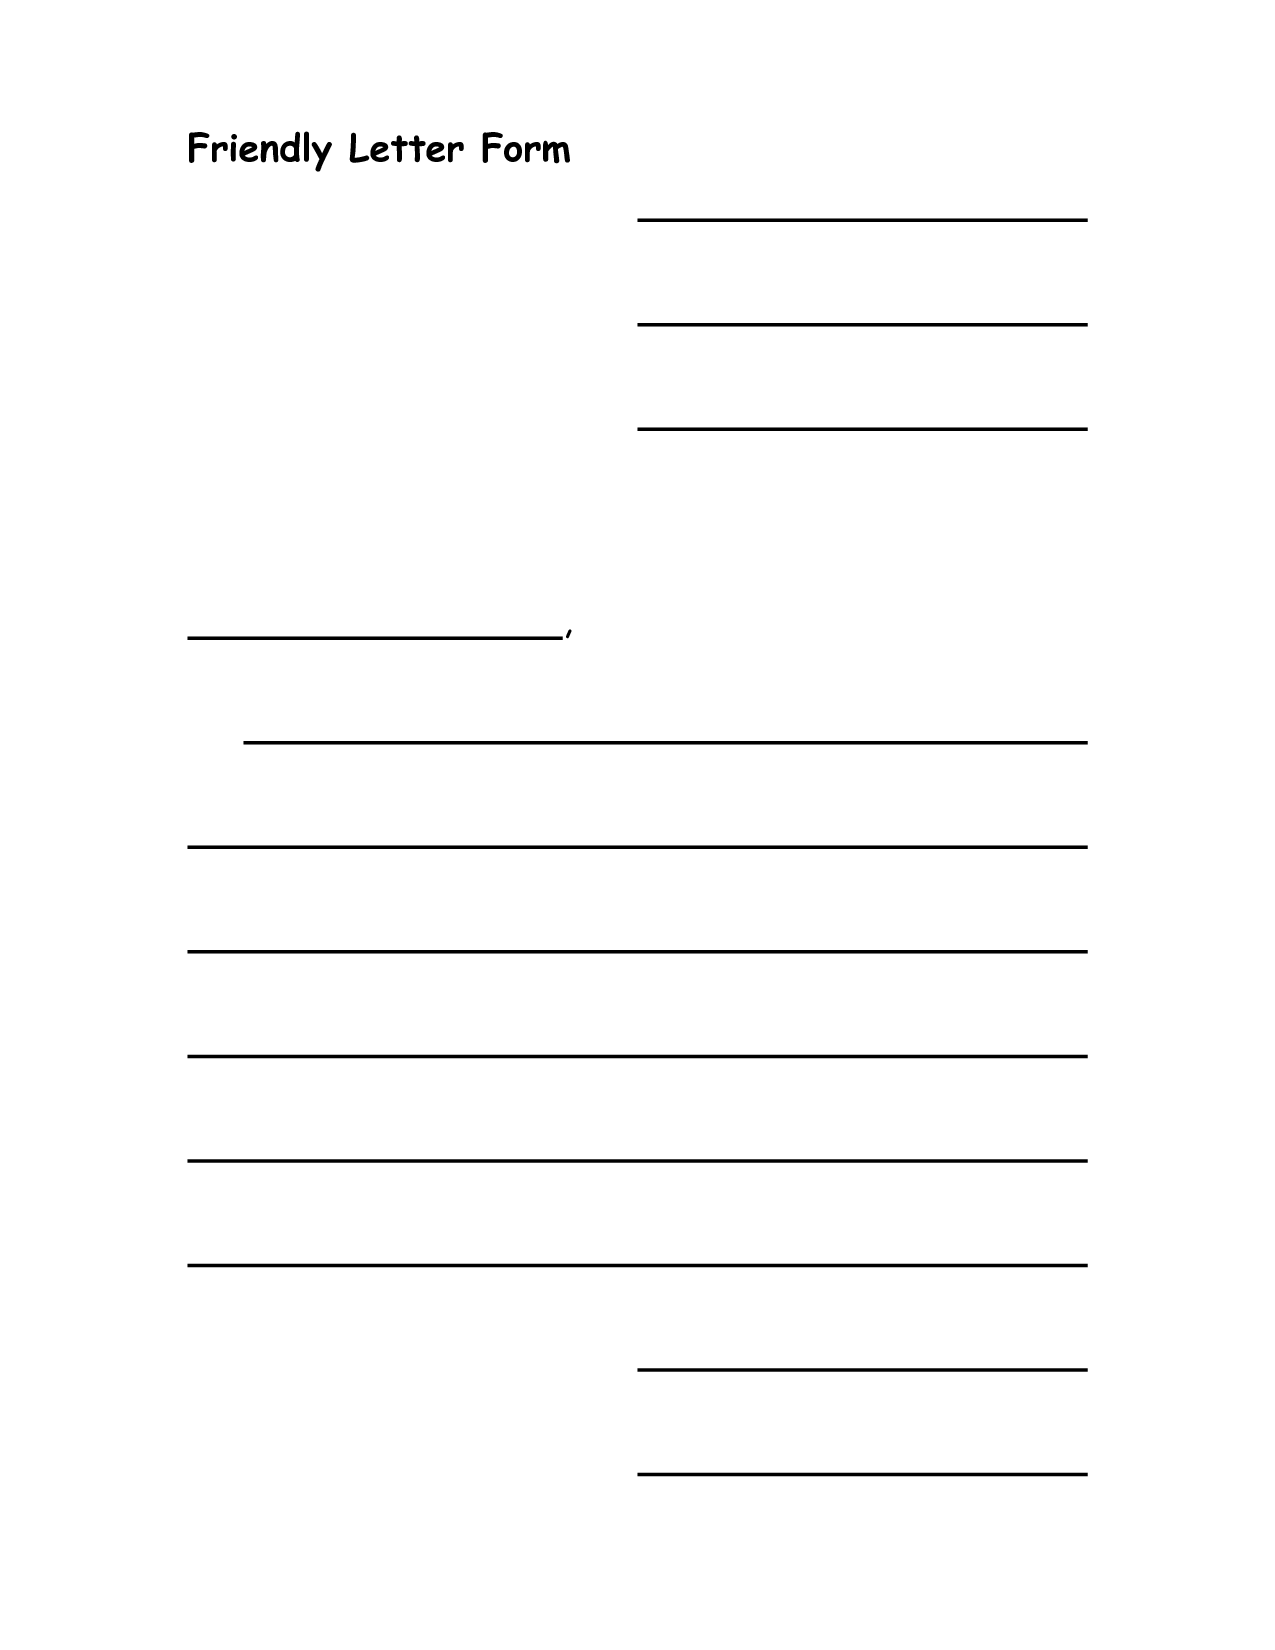 7-best-images-of-printable-friendly-letter-format-blank-friendly